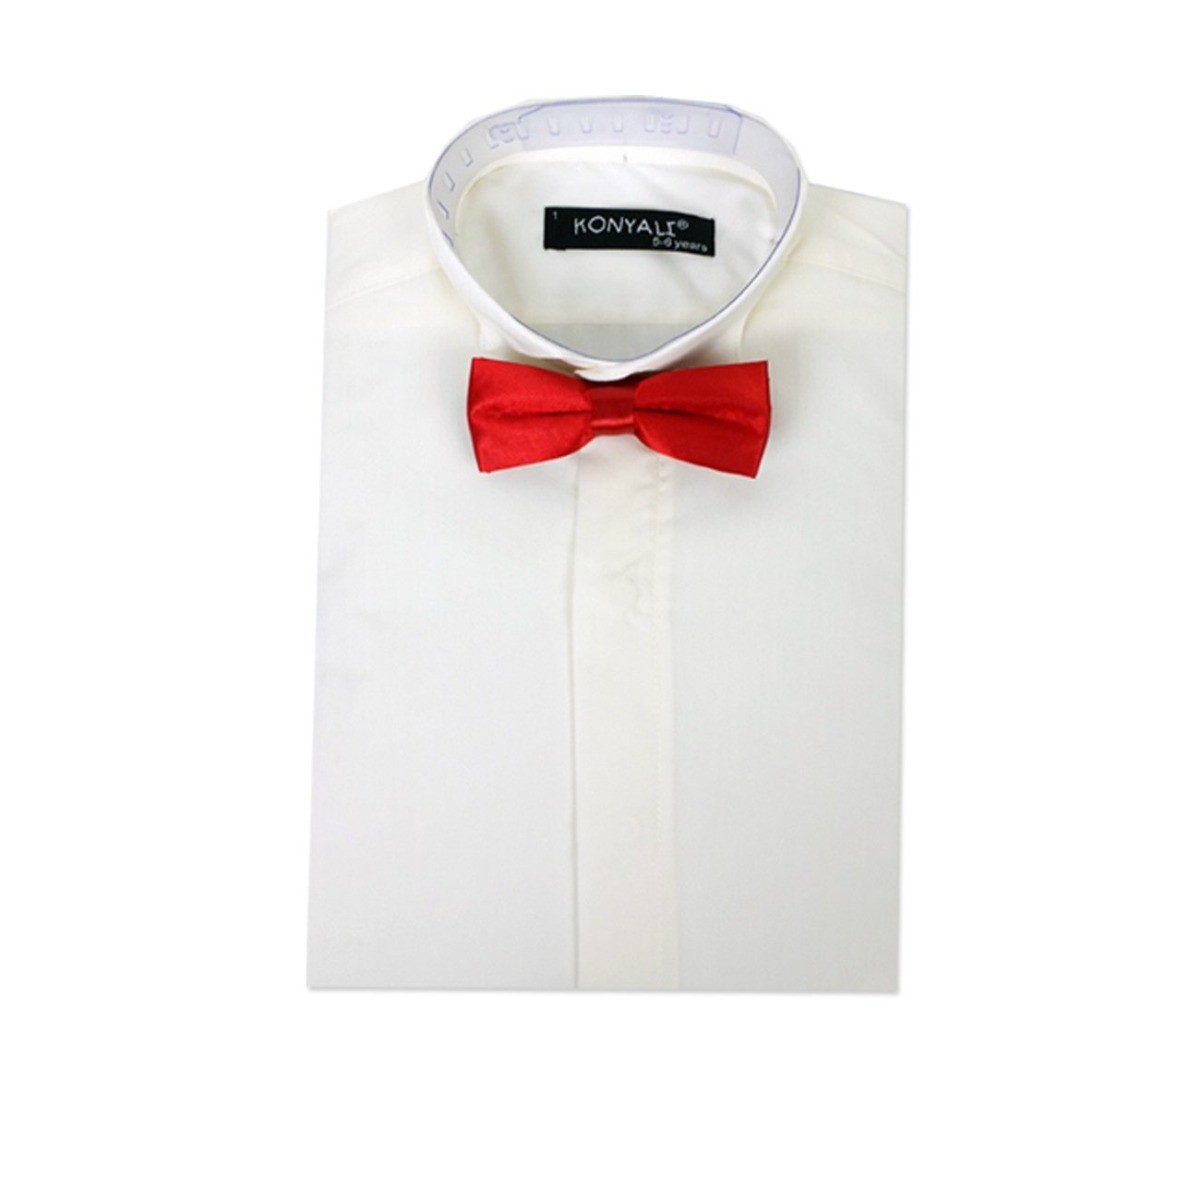 Boys Wing Collar Tuxedo Suit Shirt & Bow Tie Set - Ivory with choice of tie colour